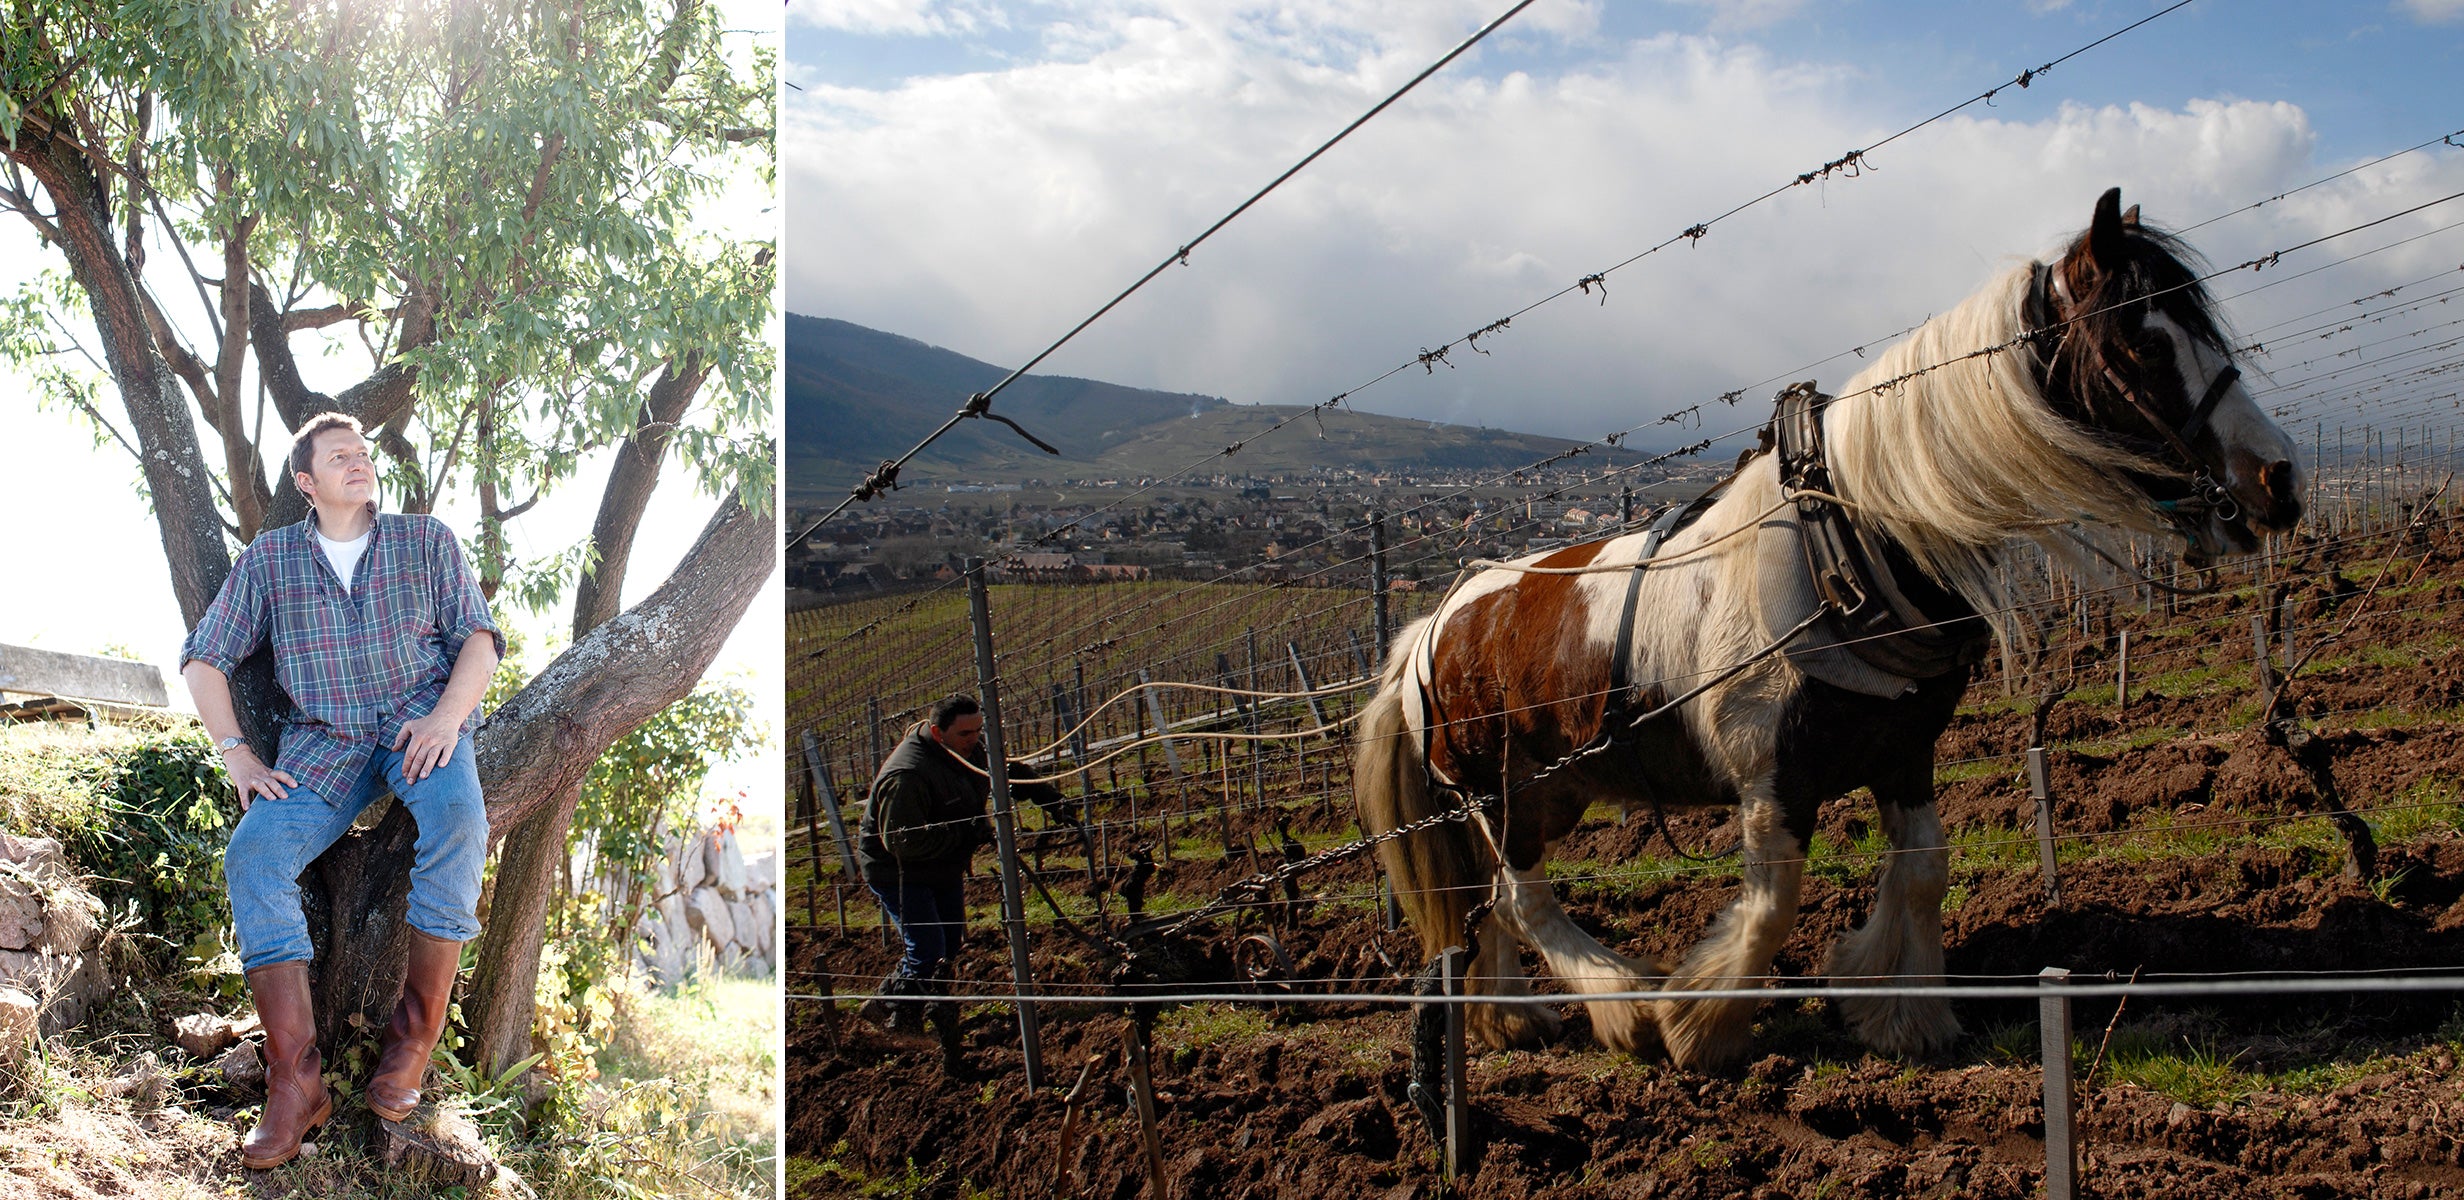 Olivier Humbrech, of Zind Humbrecht, ploughing by horse in their Brand Vineyard.